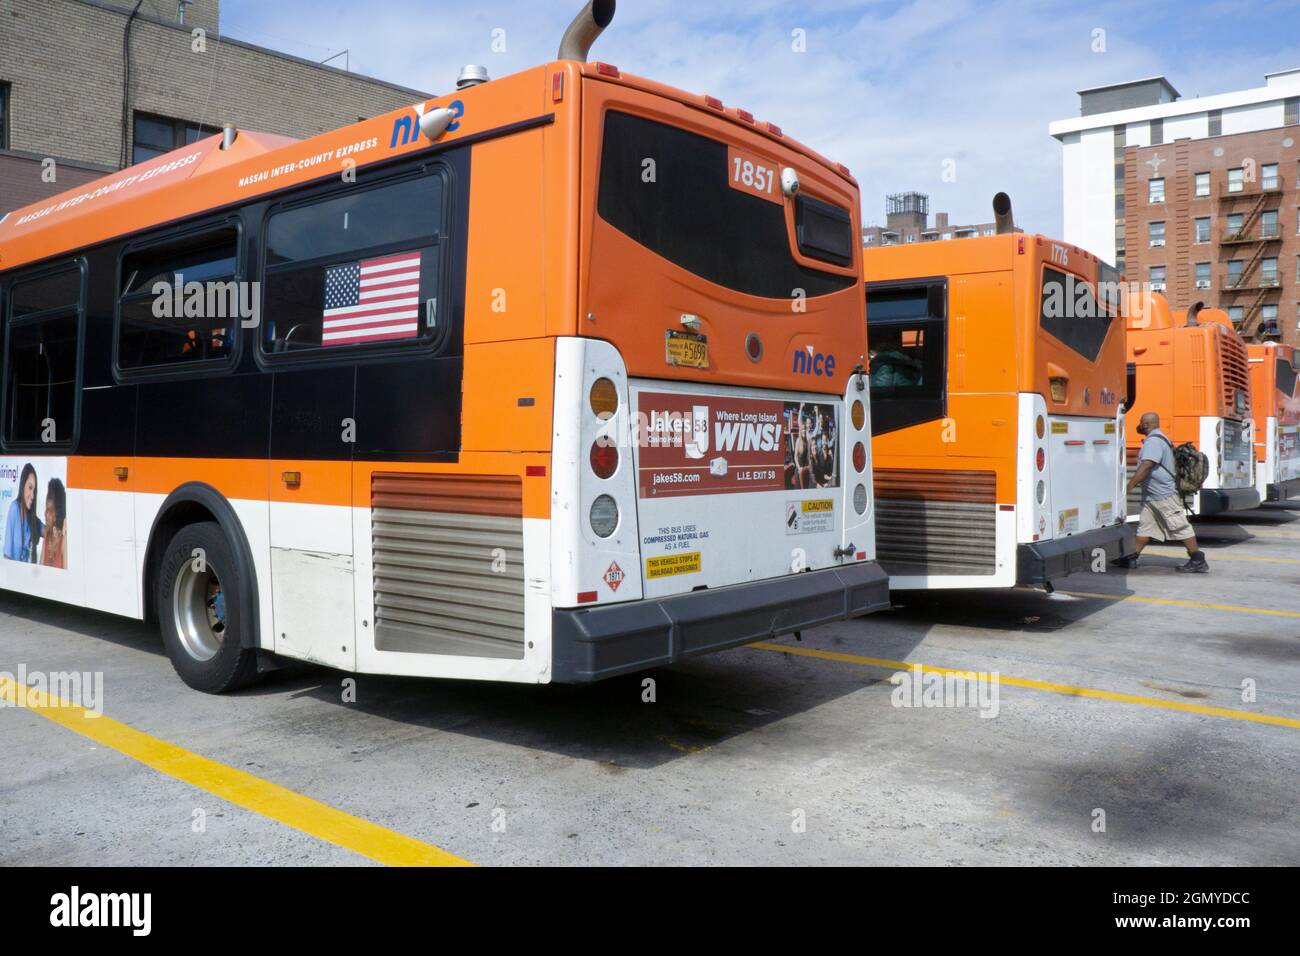 Nassau Inter-County Express buses parked in the 165th Street Terminal on Merrick Blvd. in Jamaica, Queens, New York City. Stock Photo